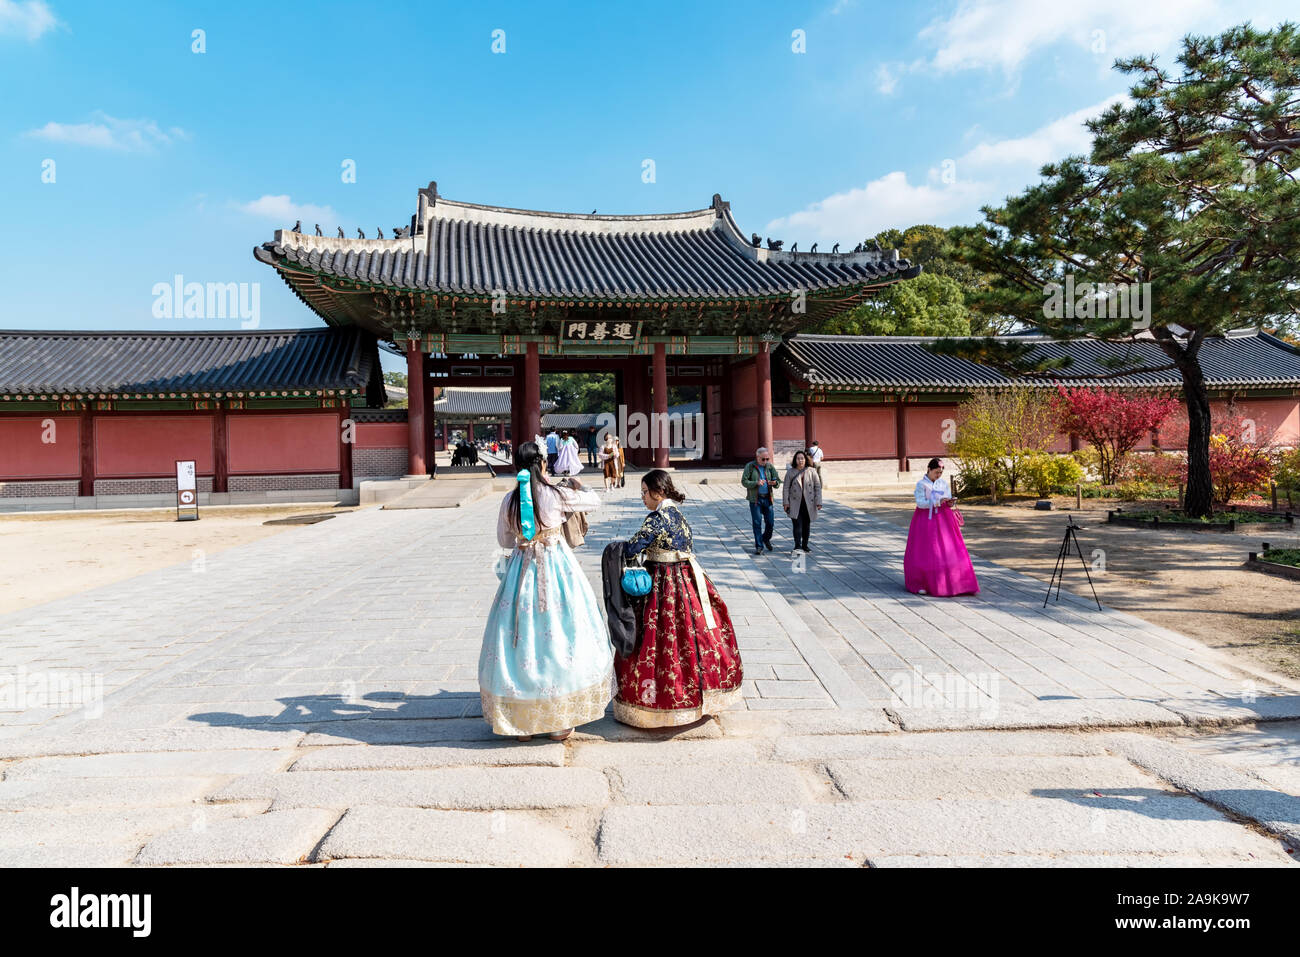 Seoul, South Korea - November 05, 2019: Tourists at Changdeokgung palace during autumn season. Located in Jongno-Gu, its listed as  UNESCO World Herit Stock Photo